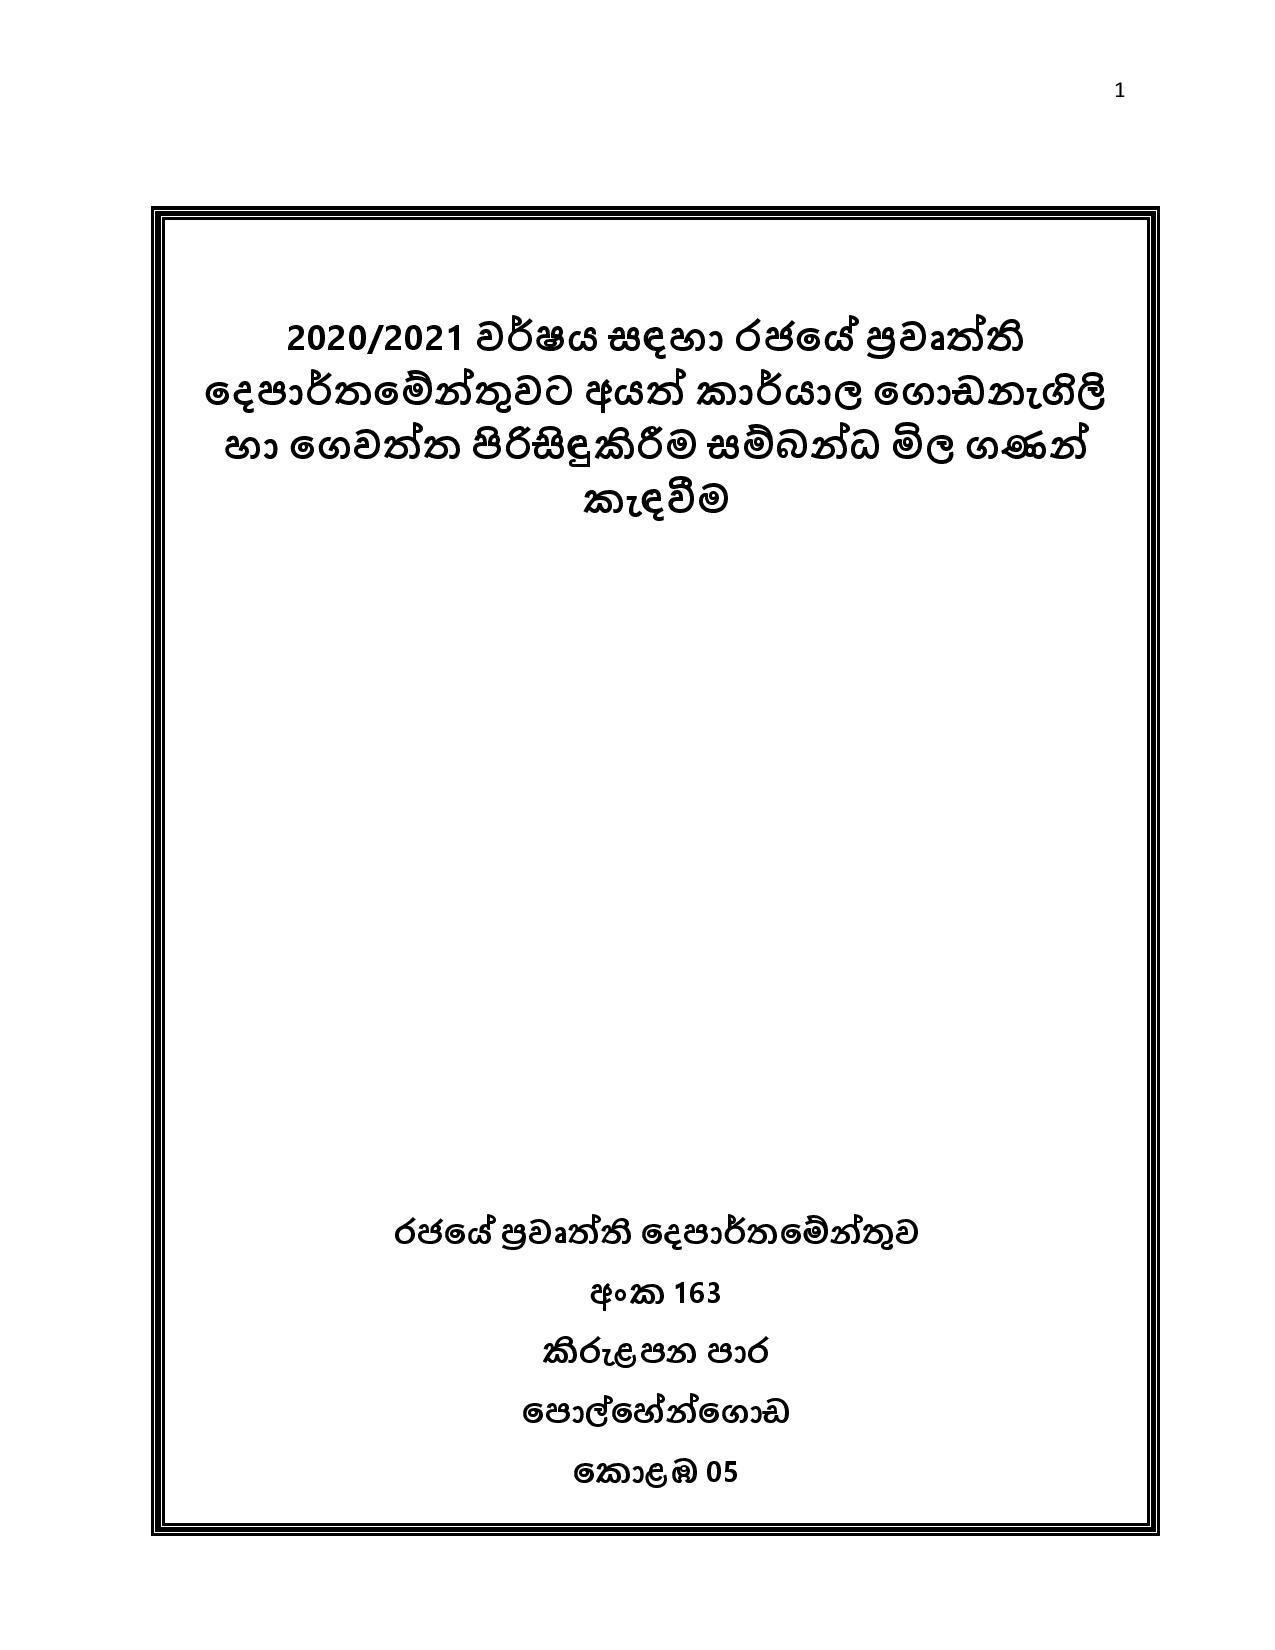 19.12.27 Tender Docurment page 001